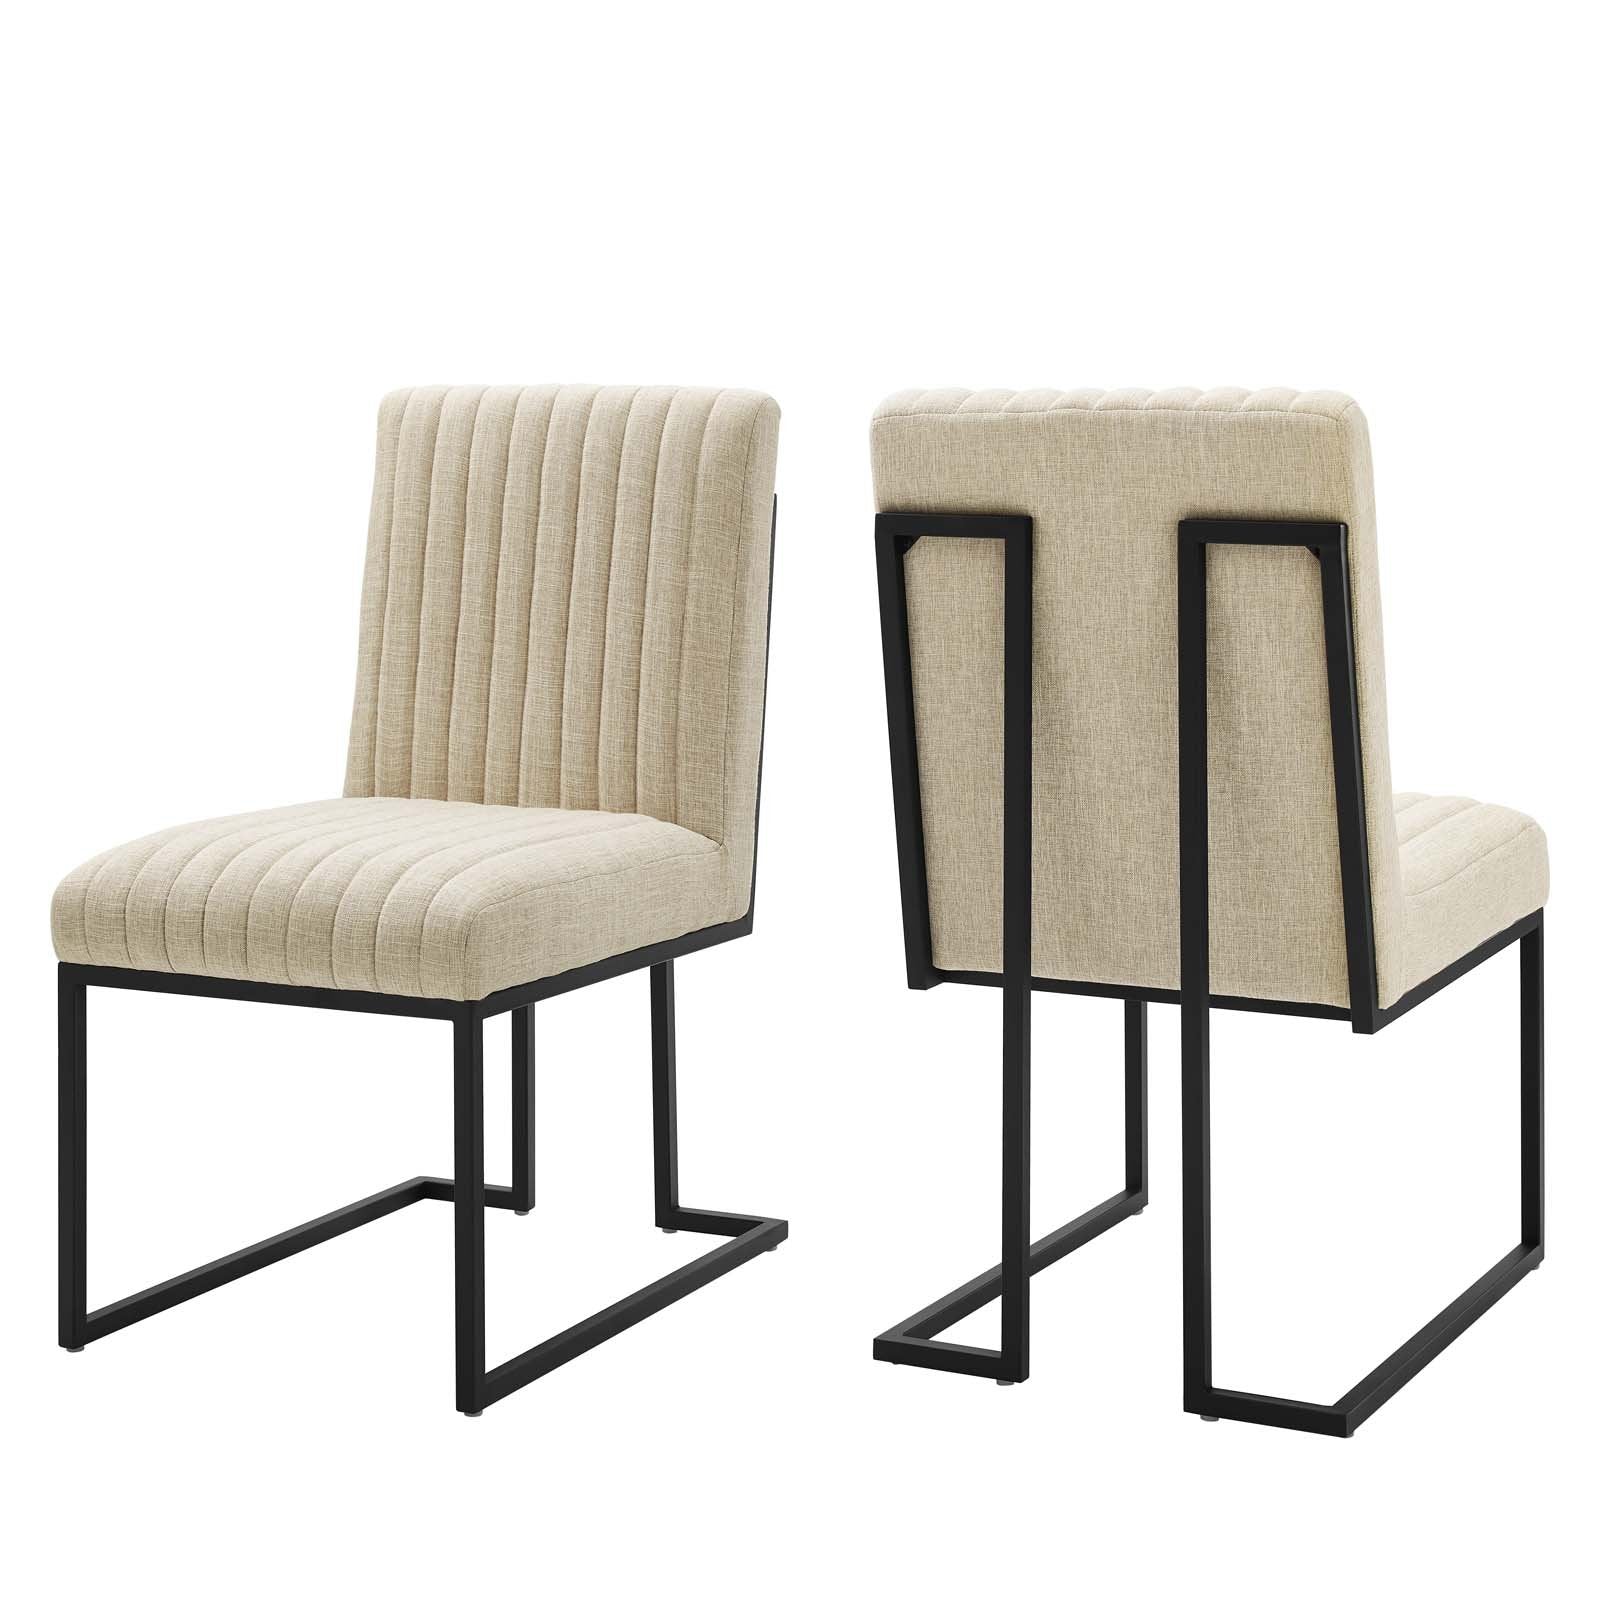 Indulge Channel Tufted Fabric Dining Chairs - Set of 2